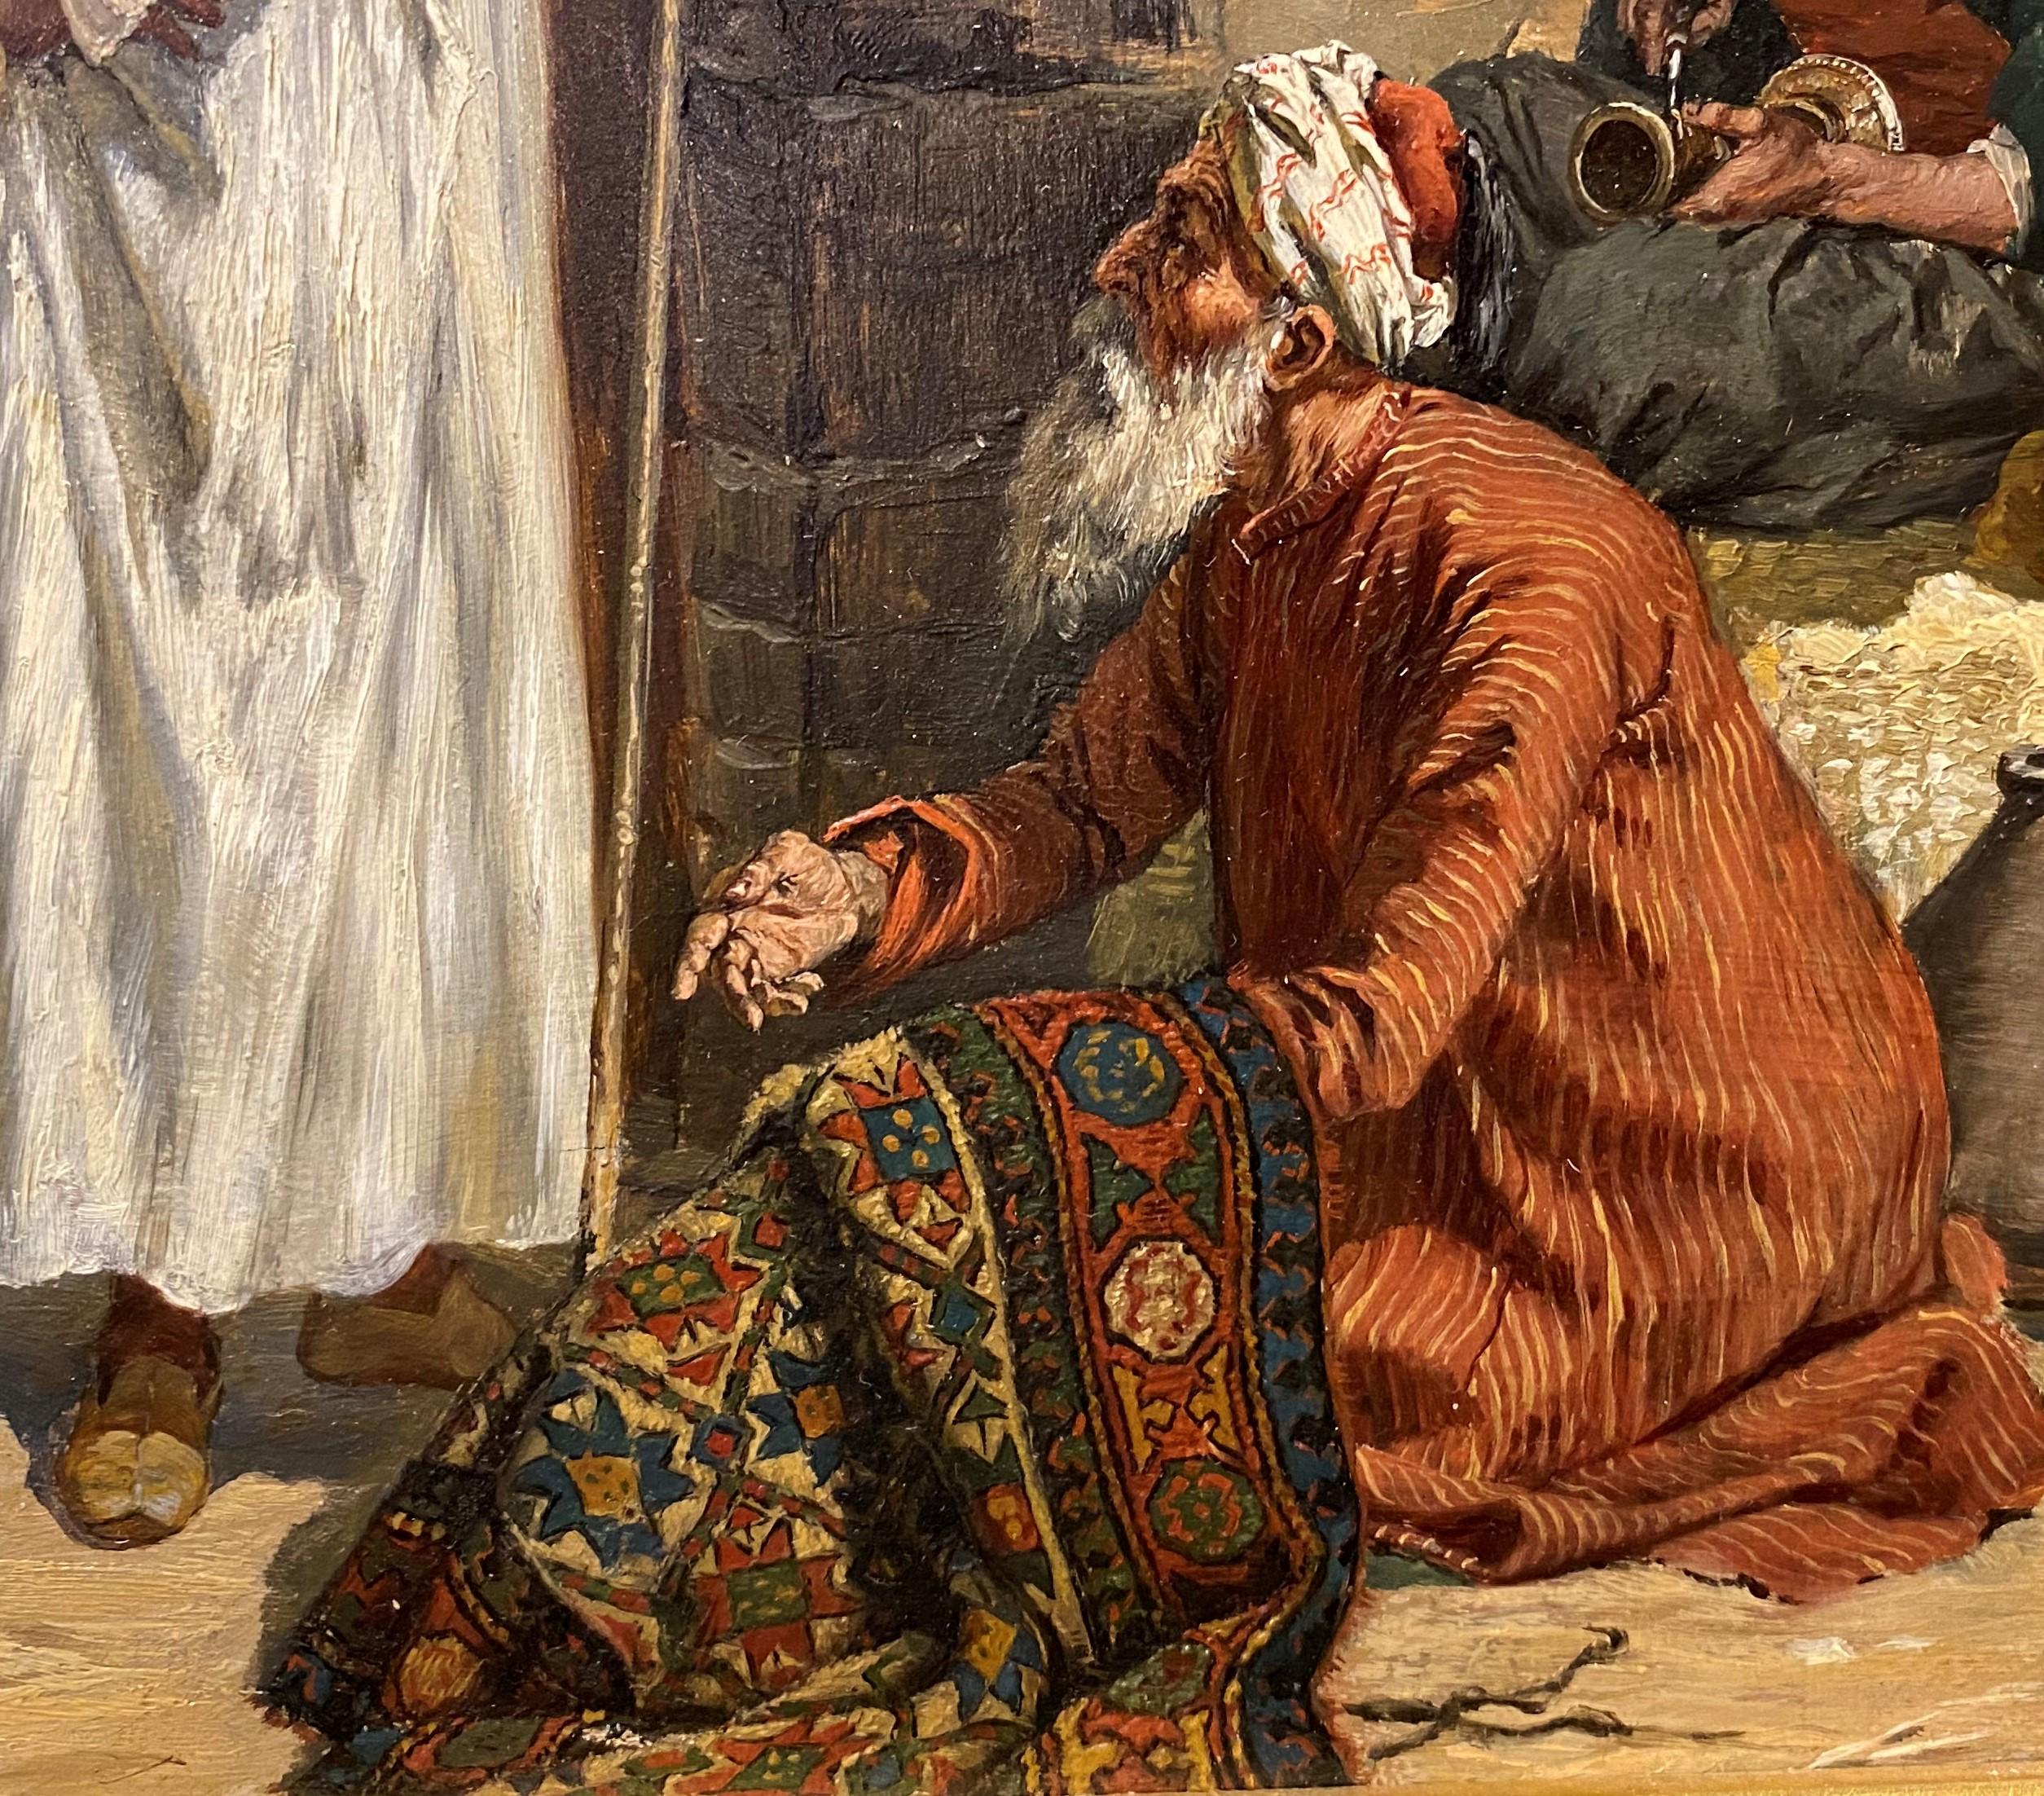 A finely executed oil painting of an Oriental rug merchant in a busy marketplace by Polish/German artist Albert Joseph Franke (1860-1924). Franke was born in Breslau, Poland, studied at Breslau Academy, then at Munich Academy. He traveled widely in